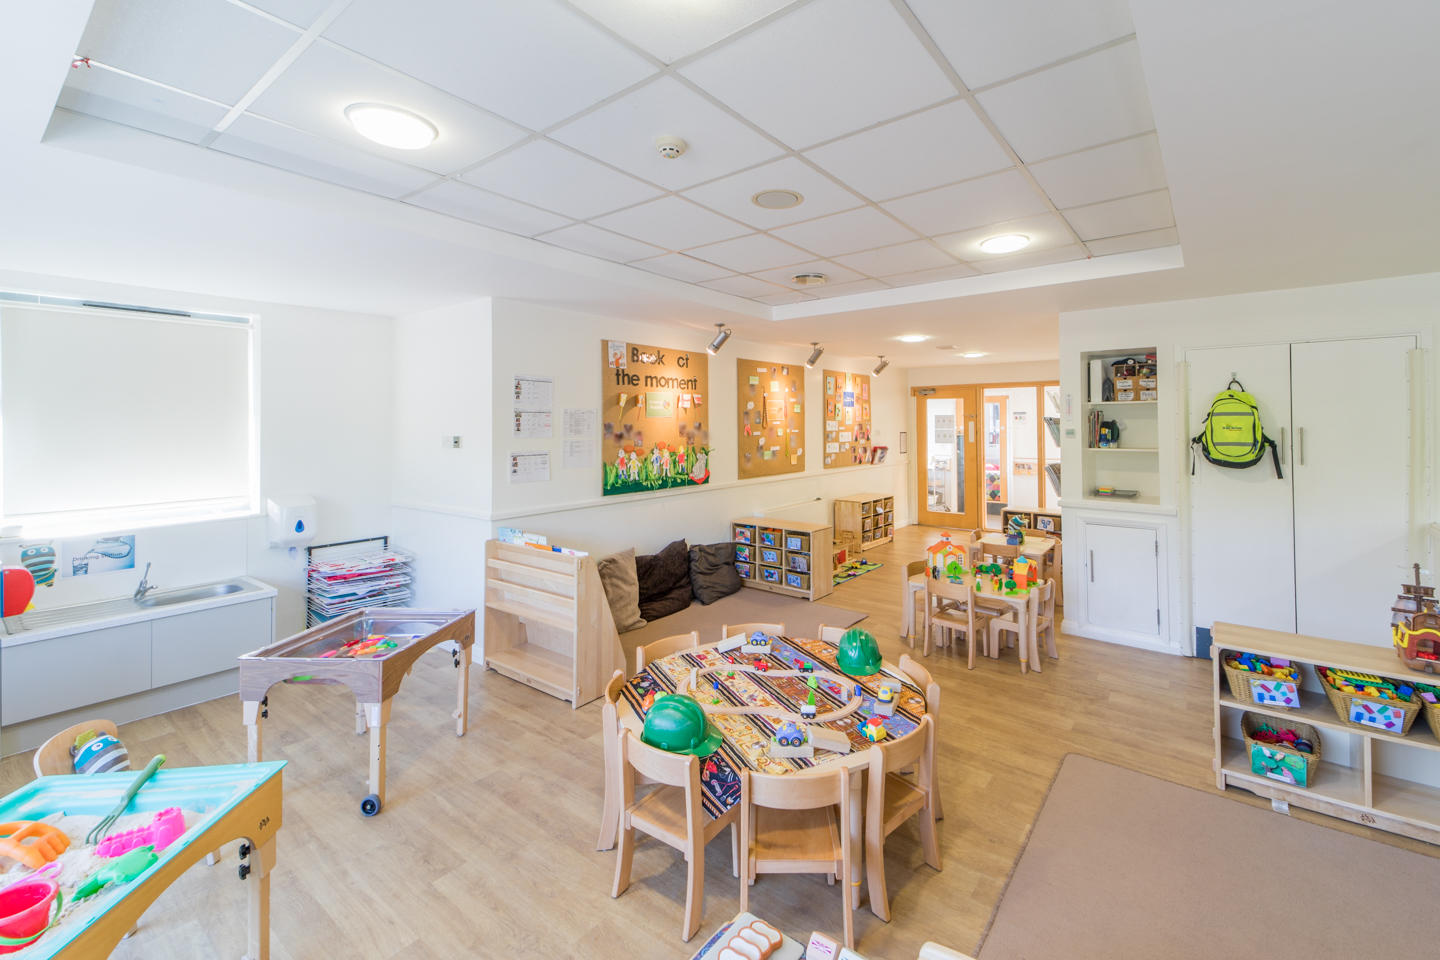 Images Bright Horizons Epping Day Nursery and Preschool